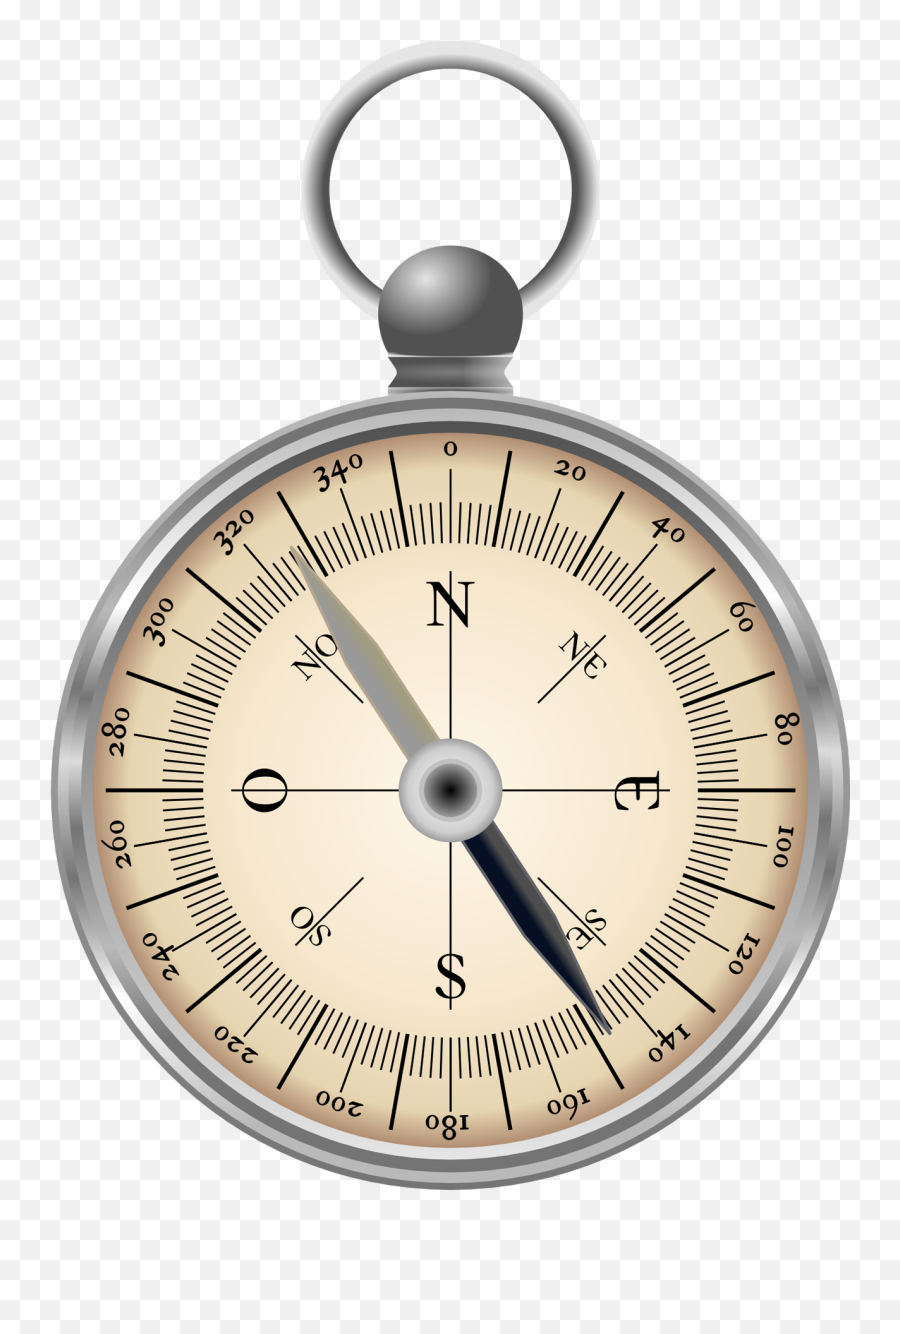 Compass Png Transparent Image - Pngpix Marooned Without A Compass Day,Compass Png